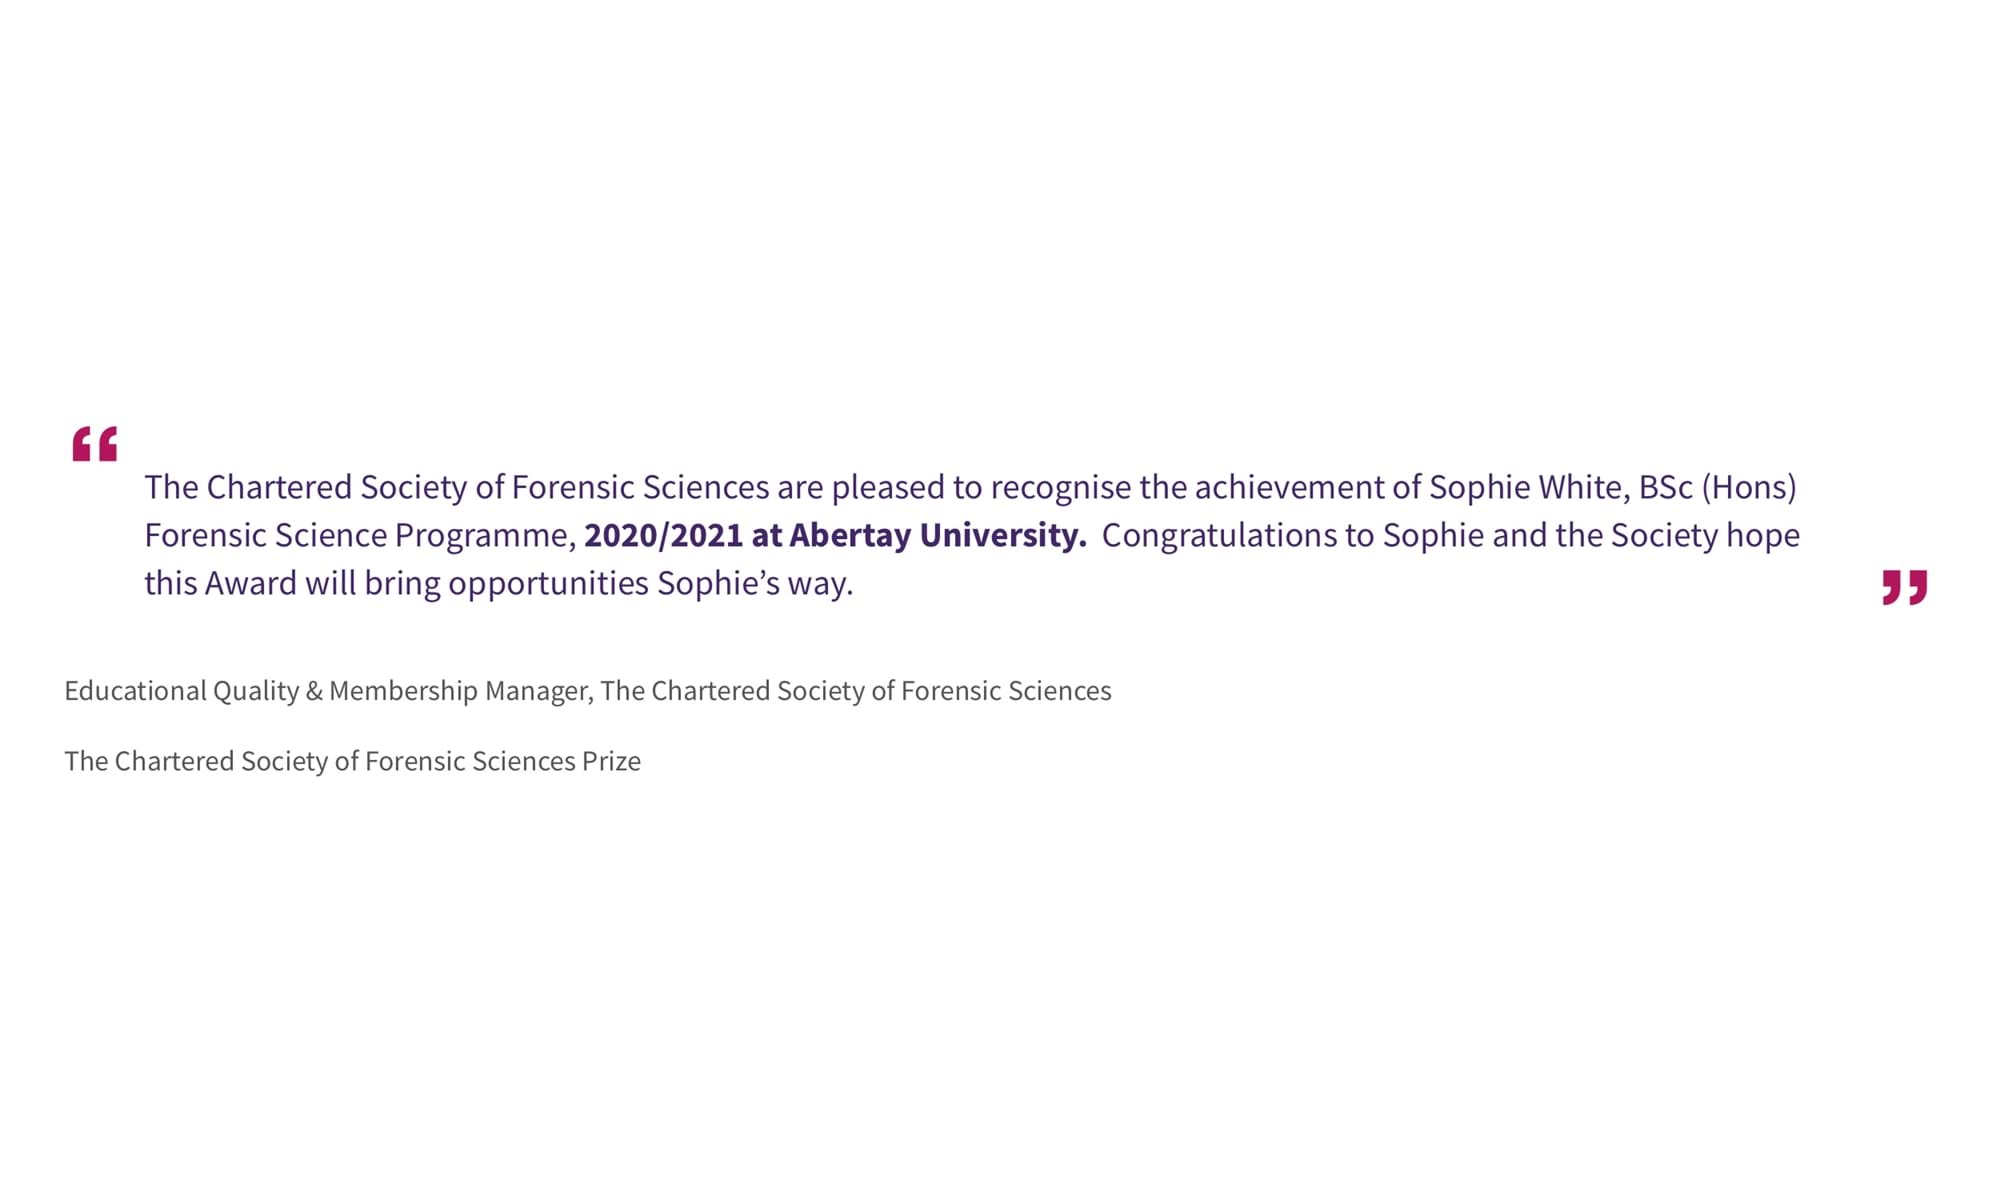 Educational Quality & Membership Manager, The Chartered Society of Forensic Sciences
The Chartered Society of Forensic Sciences Prize
“The Chartered Society of Forensic Sciences are pleased to recognise the achievement of Sophie White, BSc (Hons) Forensic Science Programme, 2020/2021 at Abertay University.  Congratulations to Sophie and the Society hope this Award will bring opportunities Sophie’s way.”
